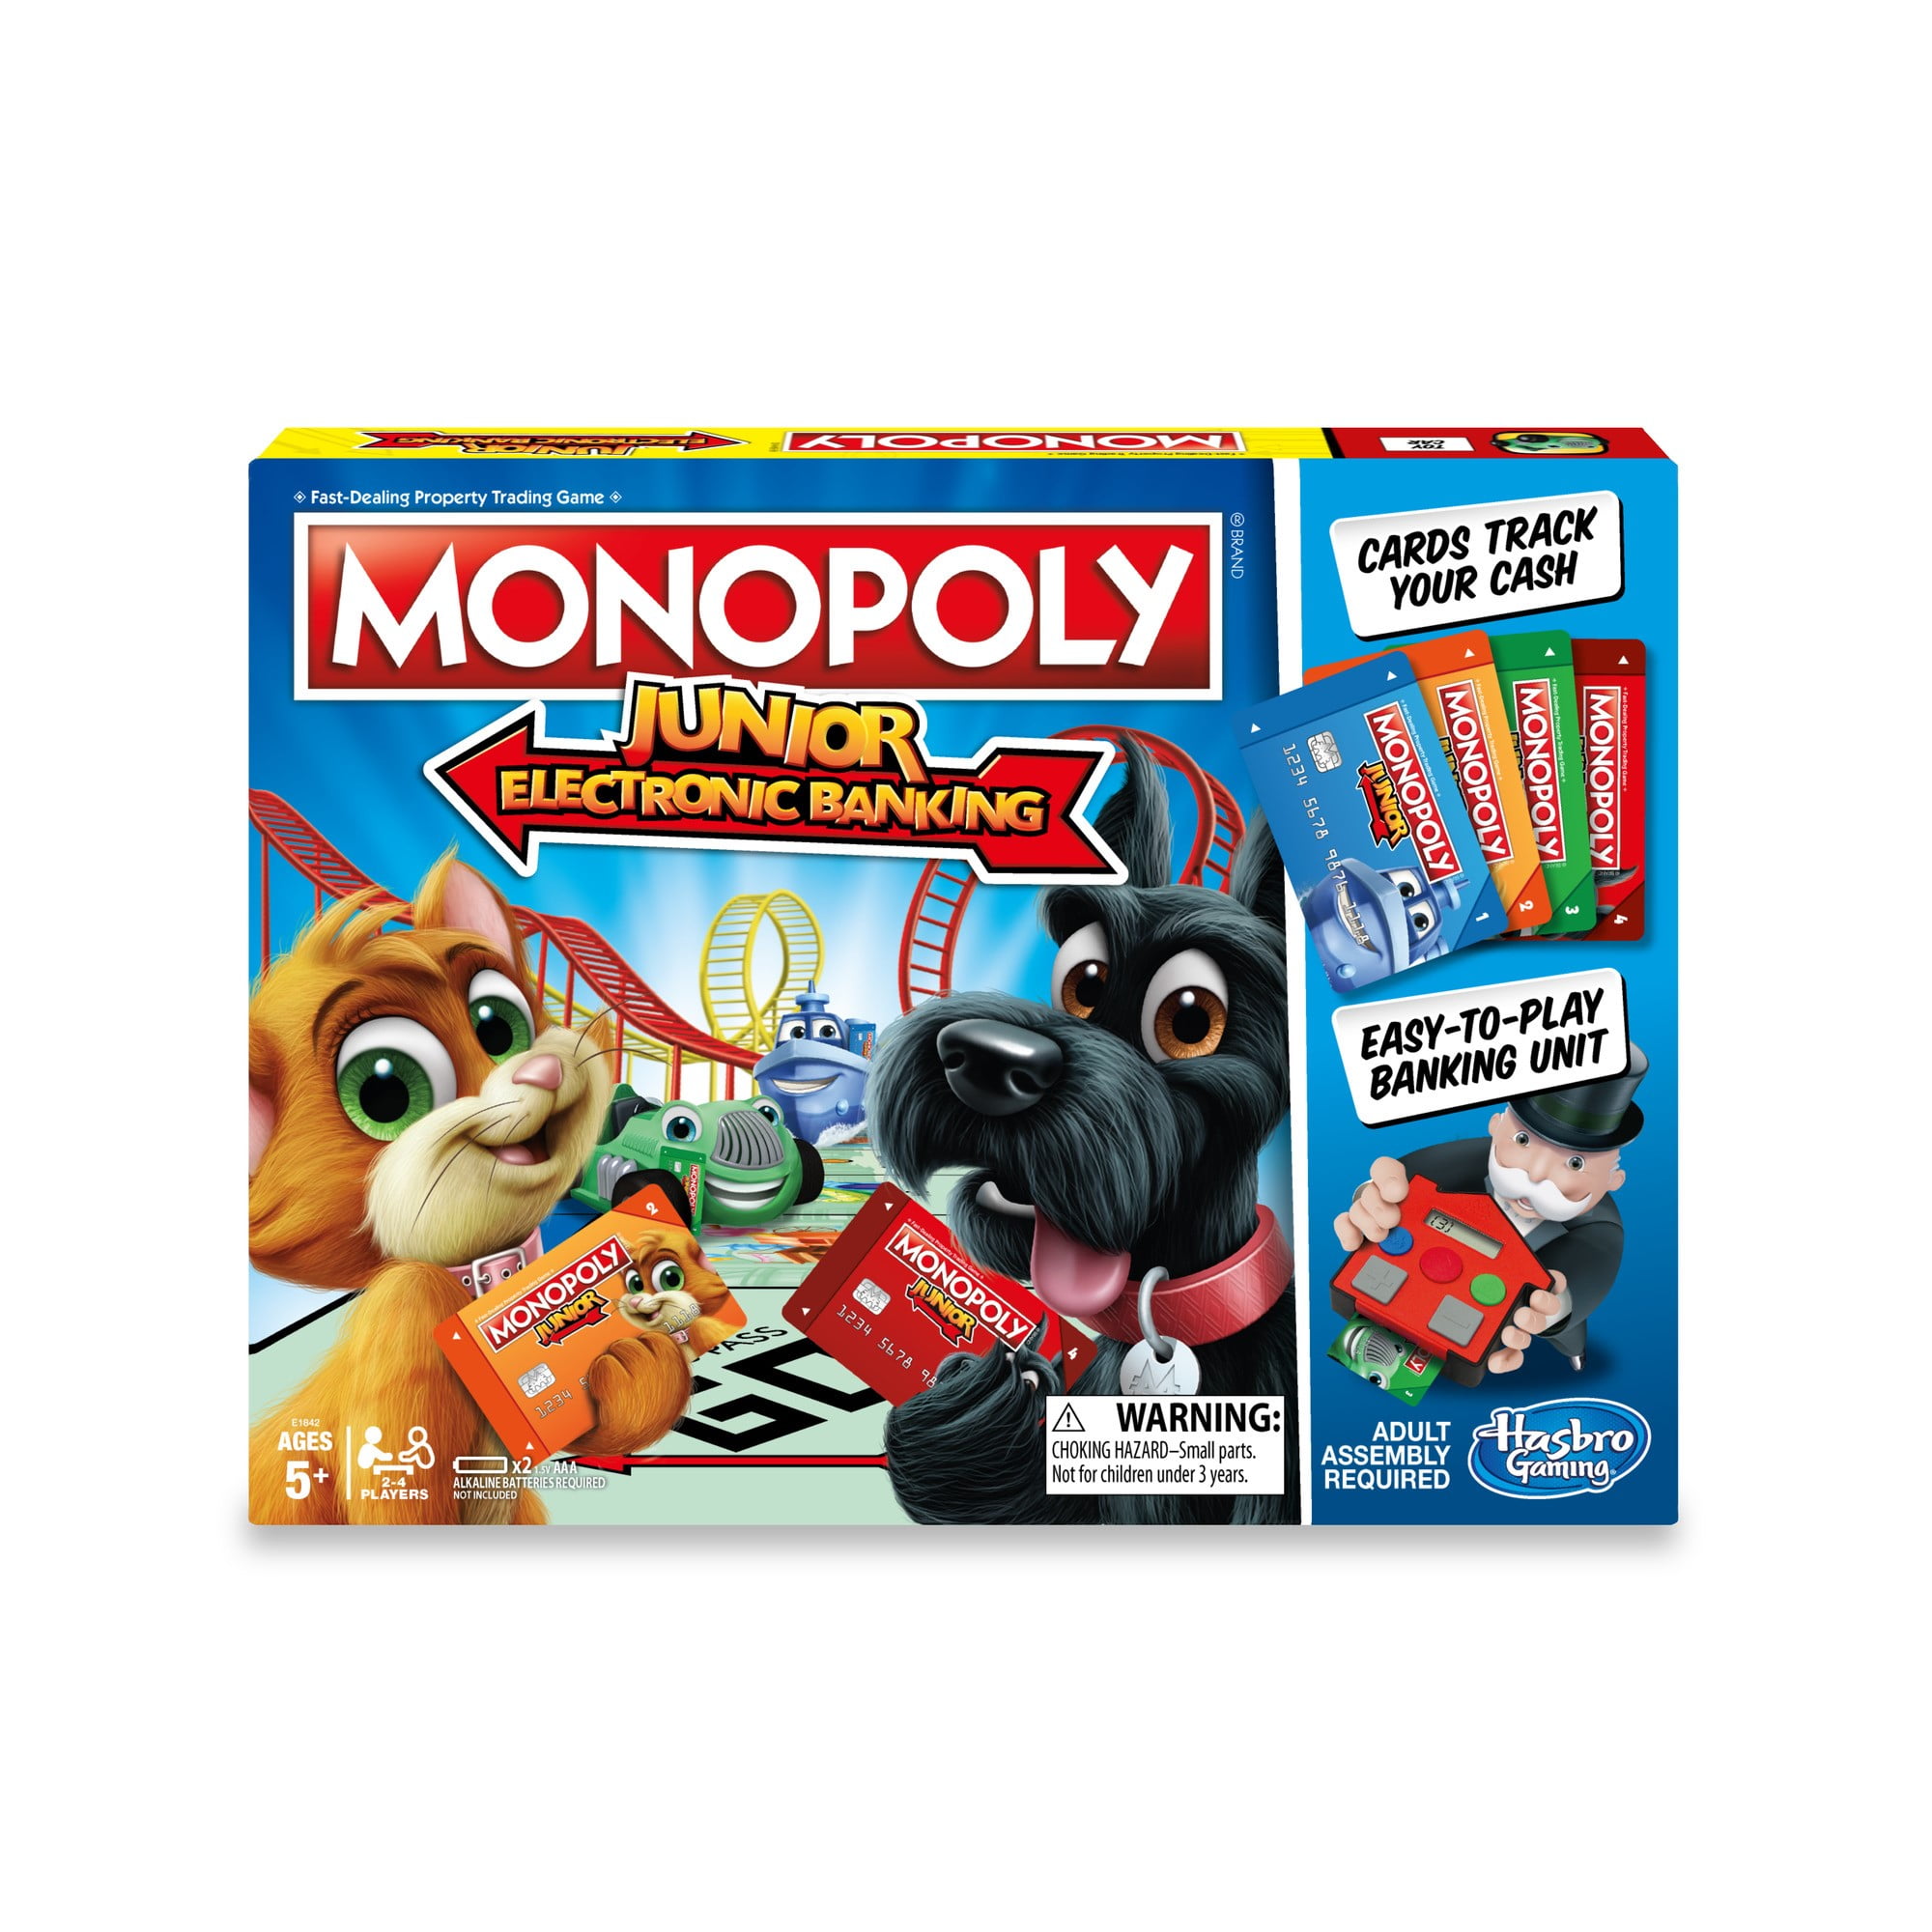 Monopoly Electronic Banking Centennial Olympic Park Mall of America Disney World 